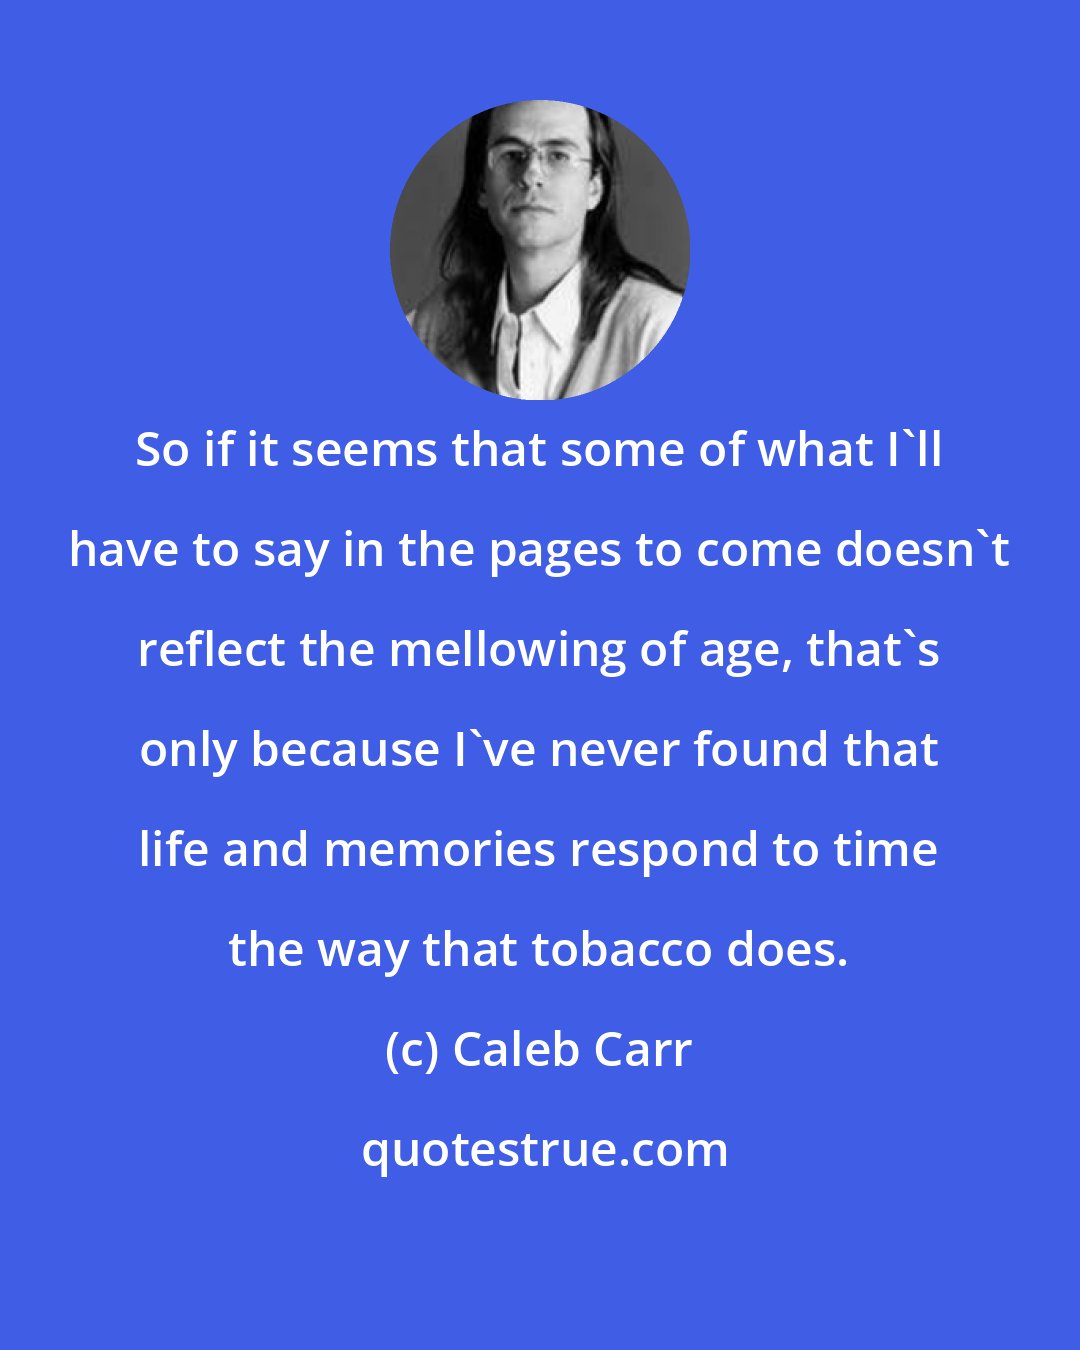 Caleb Carr: So if it seems that some of what I'll have to say in the pages to come doesn't reflect the mellowing of age, that's only because I've never found that life and memories respond to time the way that tobacco does.